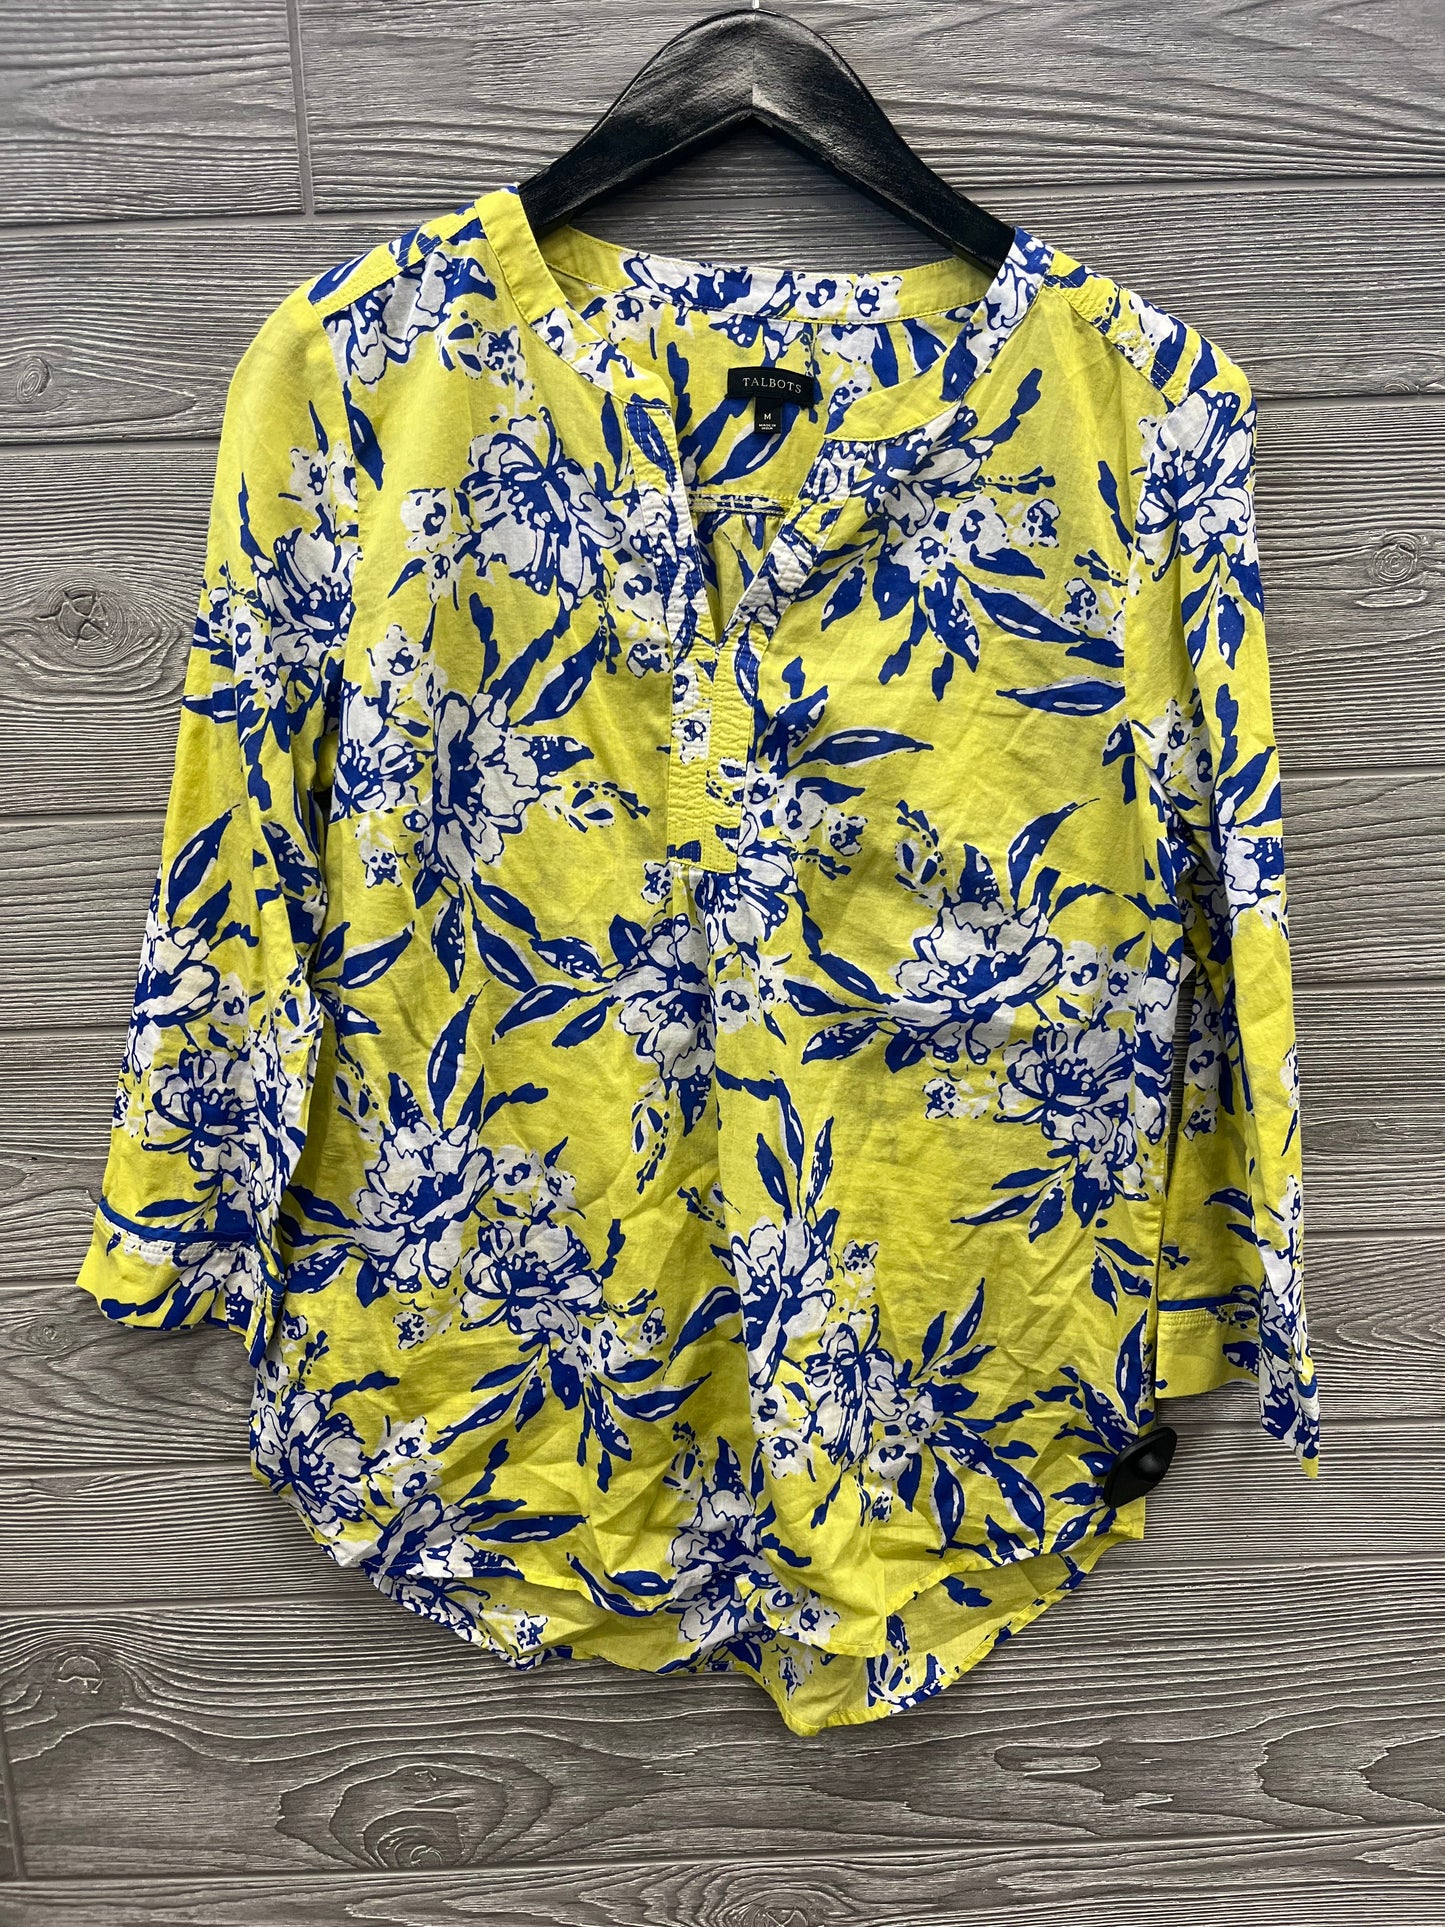 Yellow Top Long Sleeve Talbots, Size M